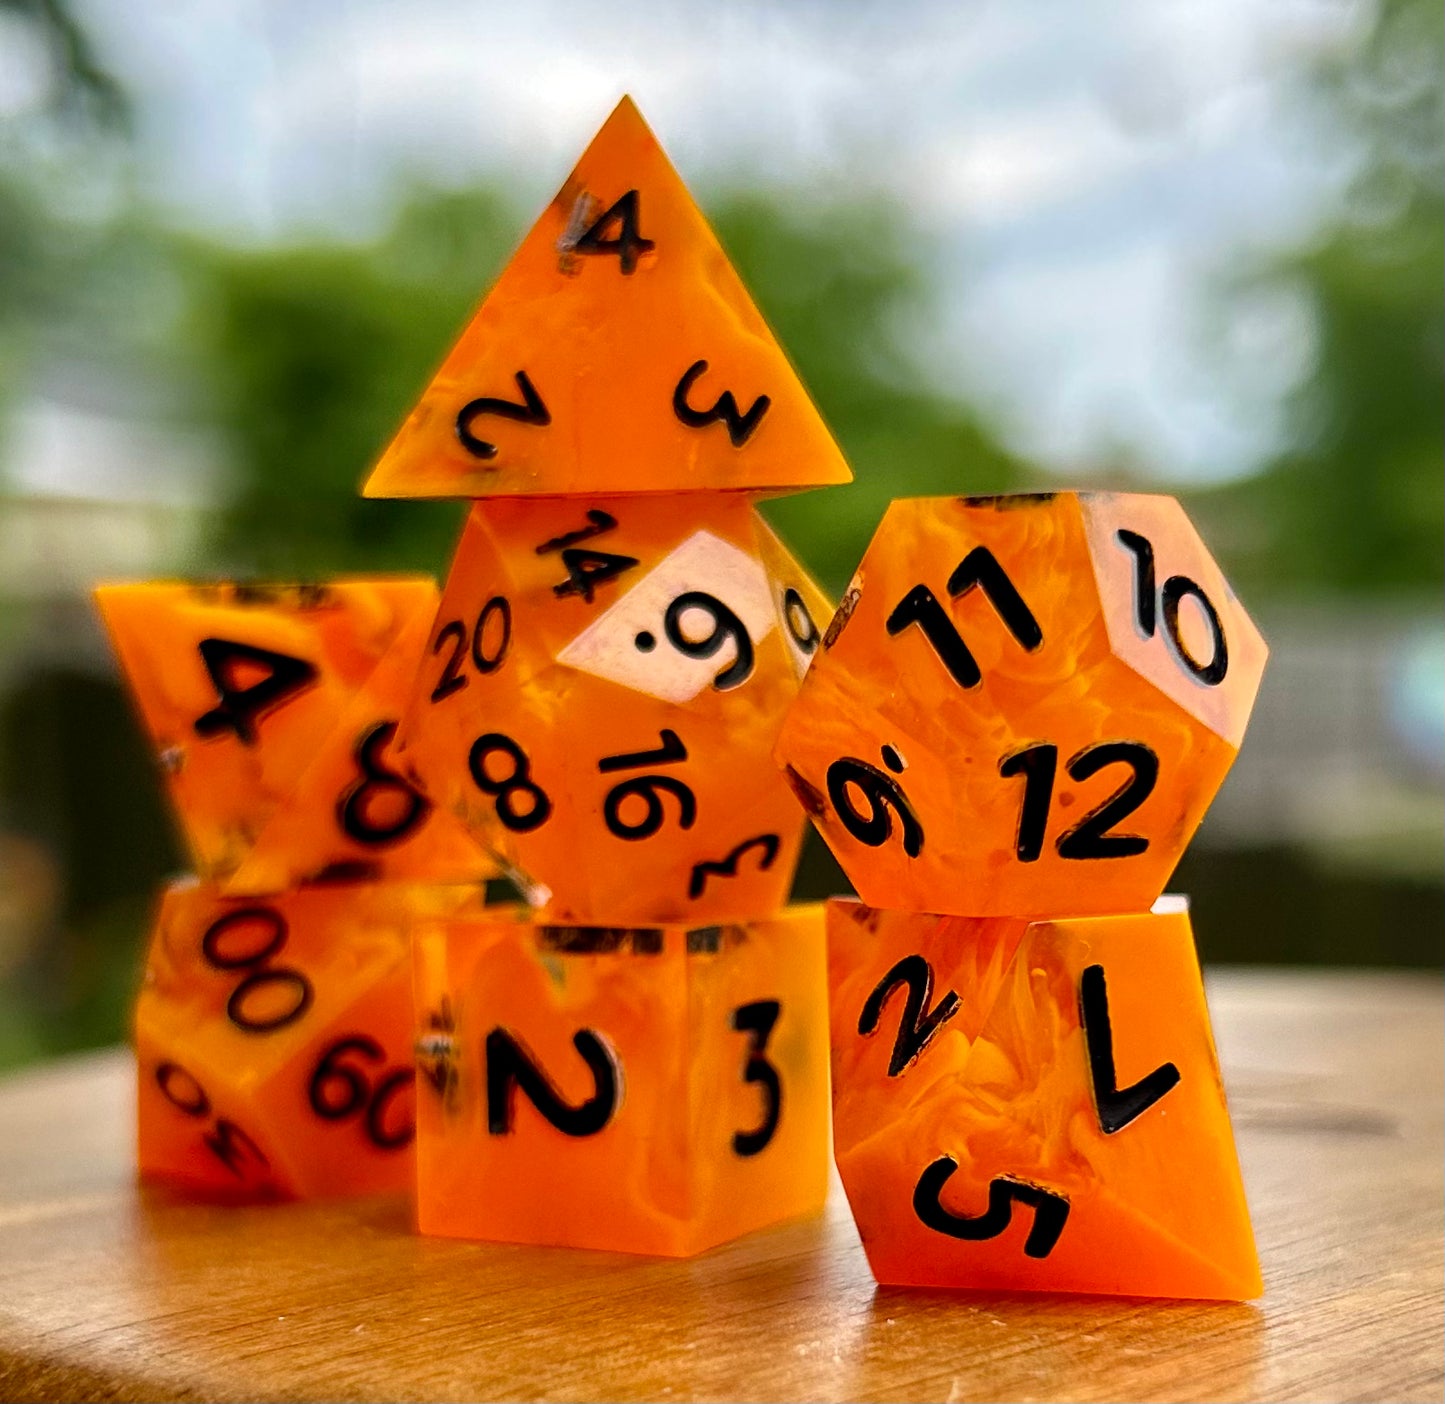 Tangy Tangerine 7-Piece Polyhedral Dice Set